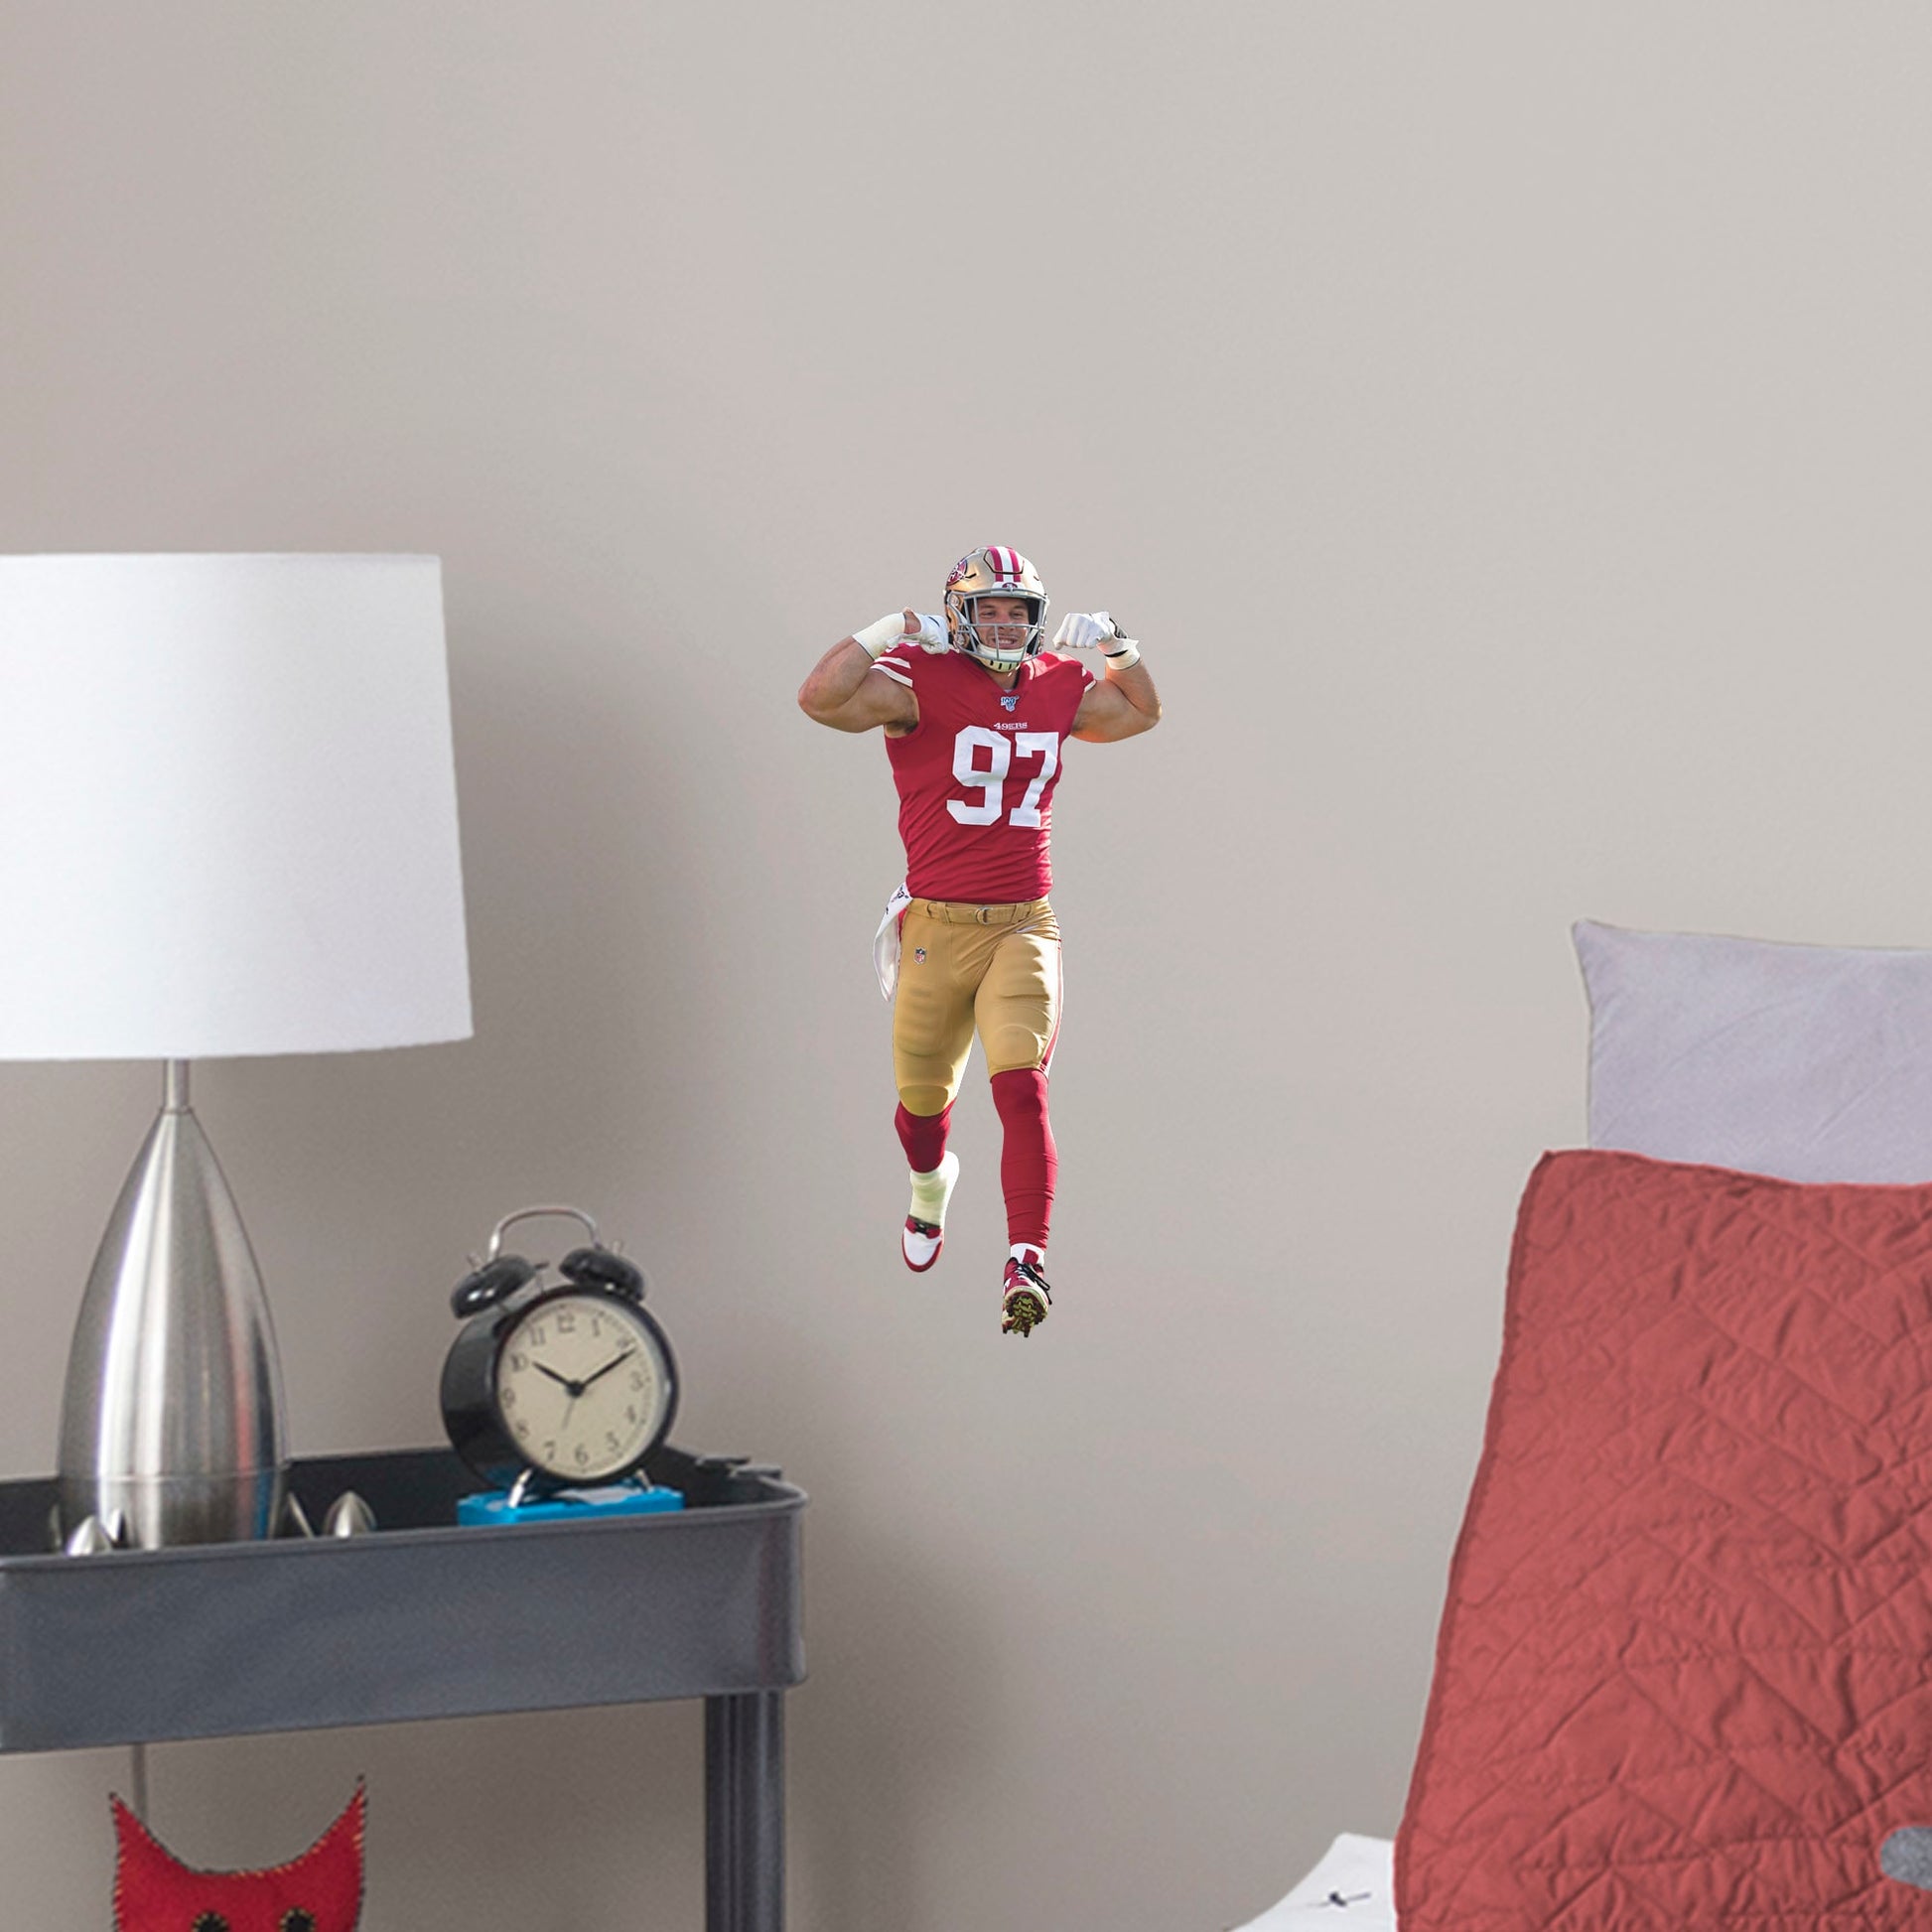 Large Athlete + 2 Decals (8"W x 16.5"H) Get personally flexed on by Nick Bosa with this unique officially licensed NFL wall decal! The 2019 Defensive Rookie of the Year likely has plenty of tackles ahead of him, and you can celebrate every one for years to come thanks to this high-quality graphic. The reusable design lets you move the Pro Bowl player wherever you choose, so you can celebrate in your bedroom, dorm room, or living room.